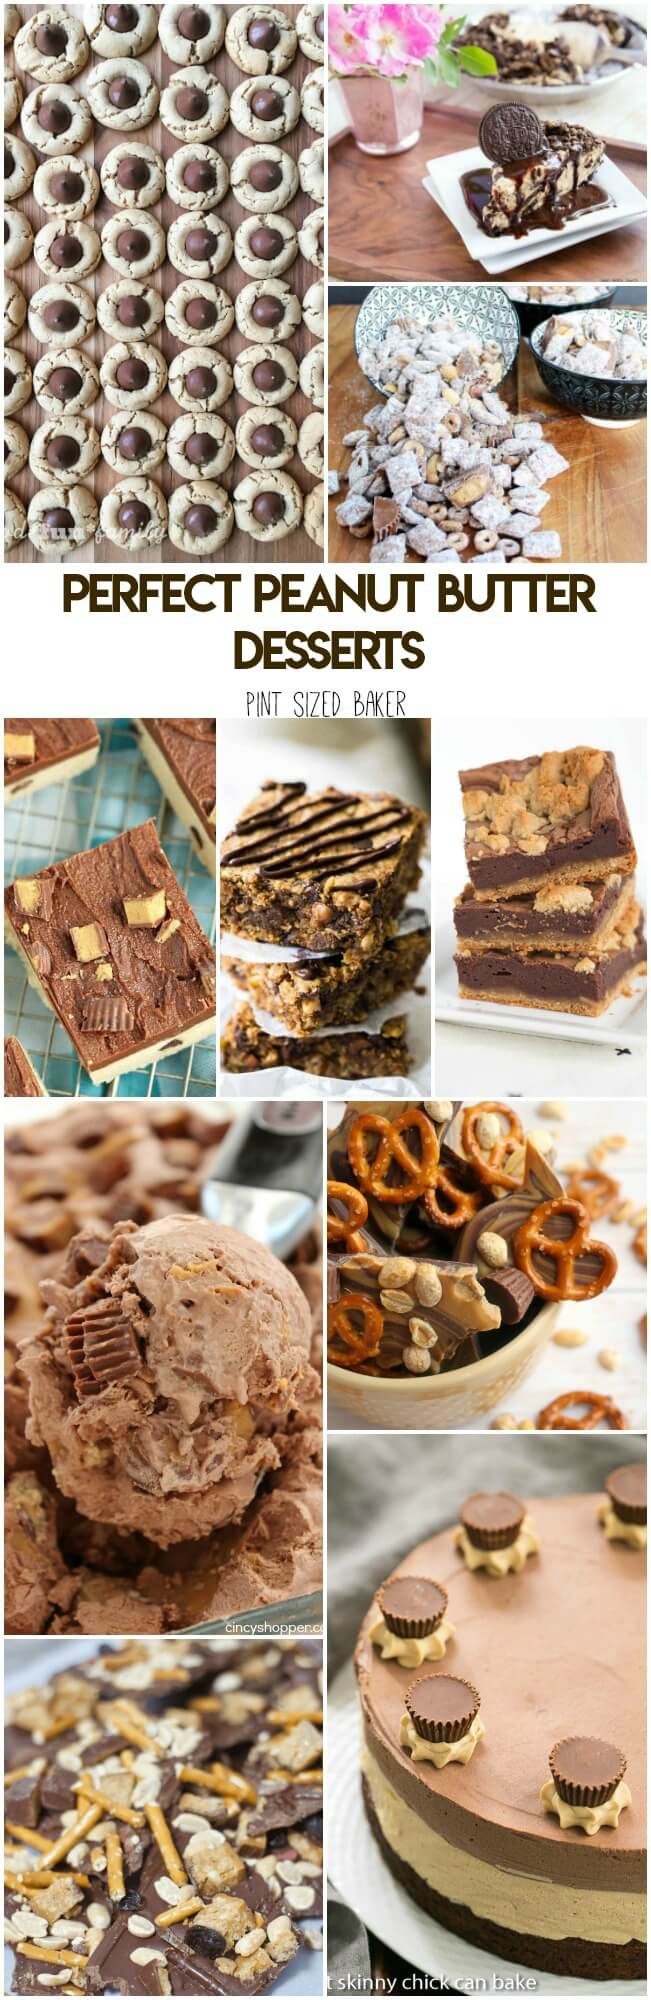 All peanut butter lovers are going to love these Perfect Peanut Butter Desserts. Cookies, pies, cakes, and candy all full of delicious peanut butter flavor. 